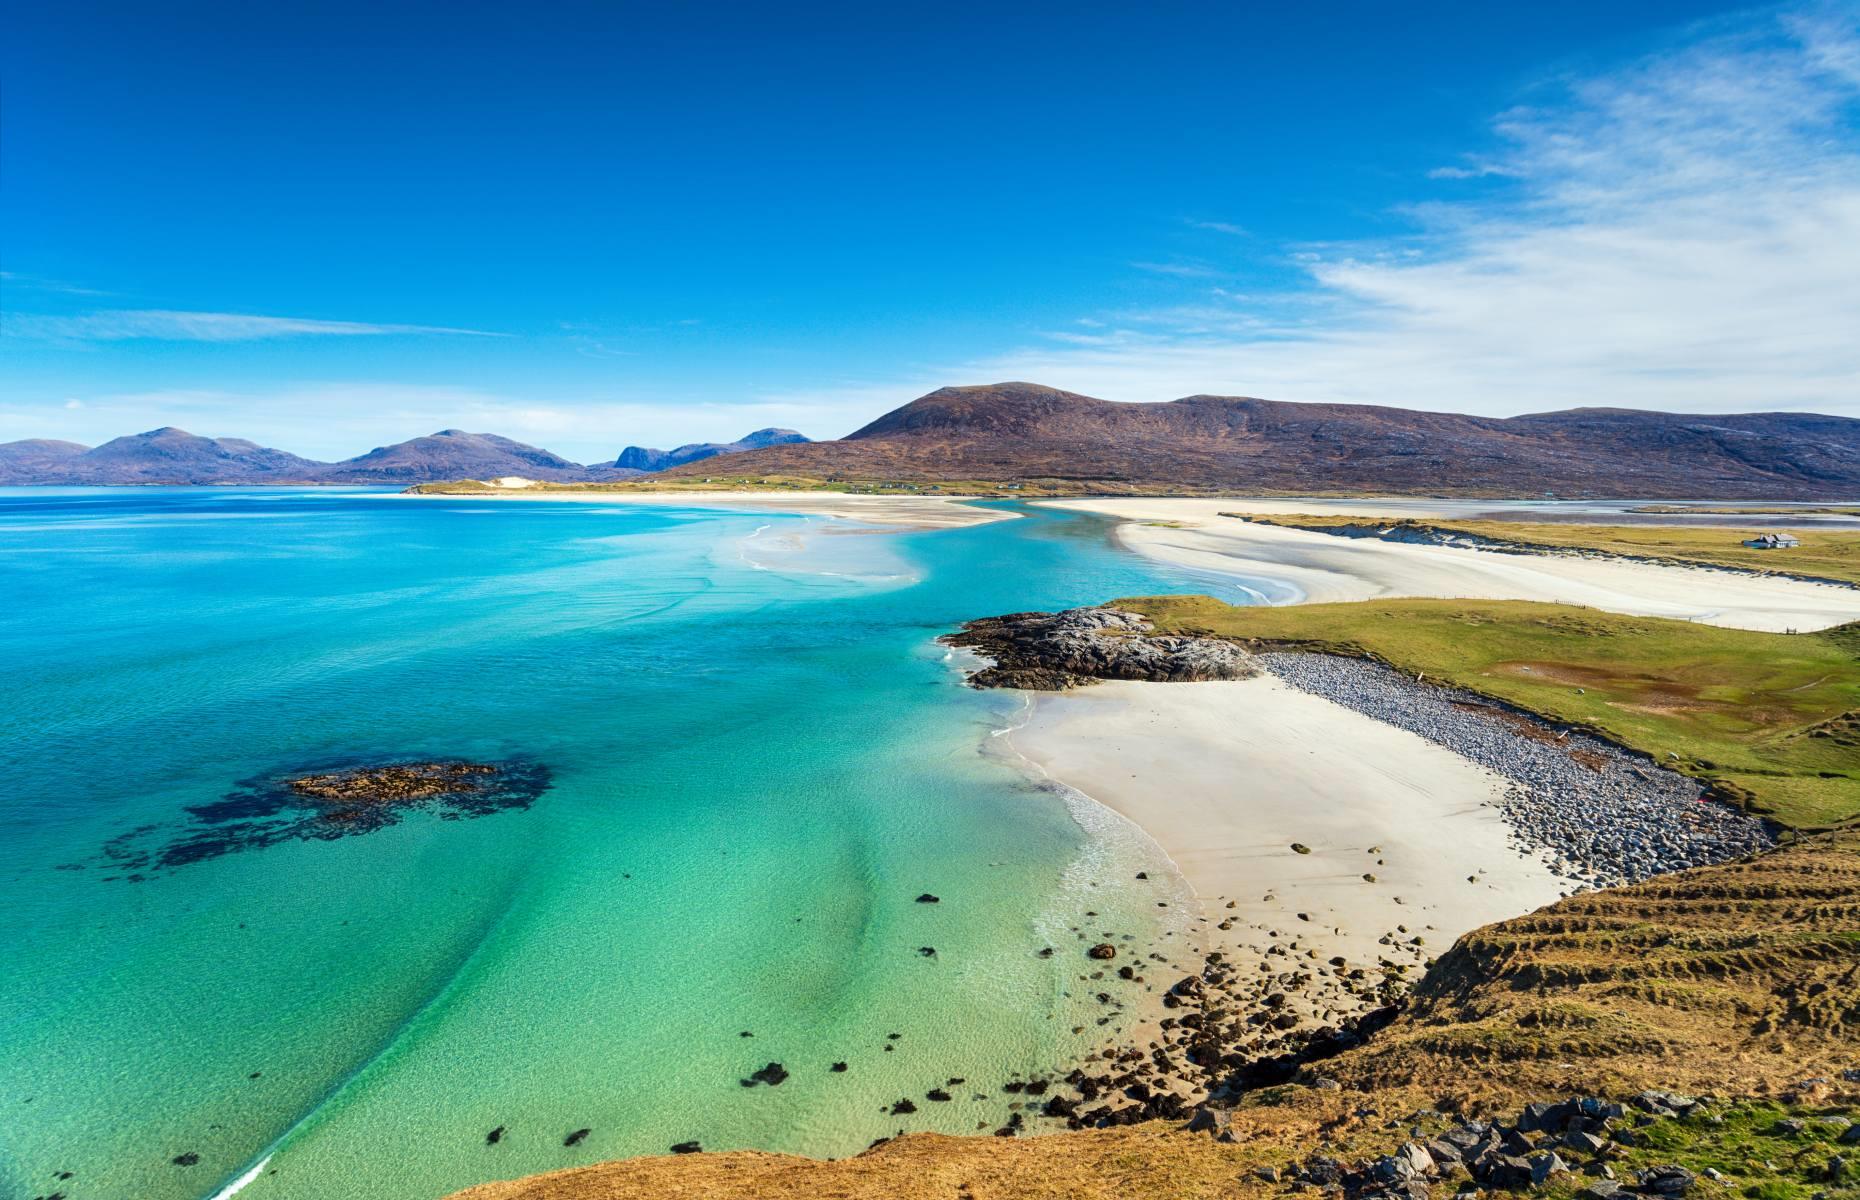 <p>While Europe’s most talked-about places are popular for a reason and shouldn’t necessarily be dropped from your itinerary, there is far more to this little continent than what you see on social media. For instance, Scotland isn’t all just moody castles and rugged highlands – it has Caribbean-like beaches, like the one pictured here on the Isle of Harris.</p>  <p>You’ll be vastly rewarded for venturing beyond Croatia’s Dalmatian Coast and Iceland’s Golden Circle, and considering the countries you don’t see documented as much, such as Kosovo, Albania, and Lithuania.</p>